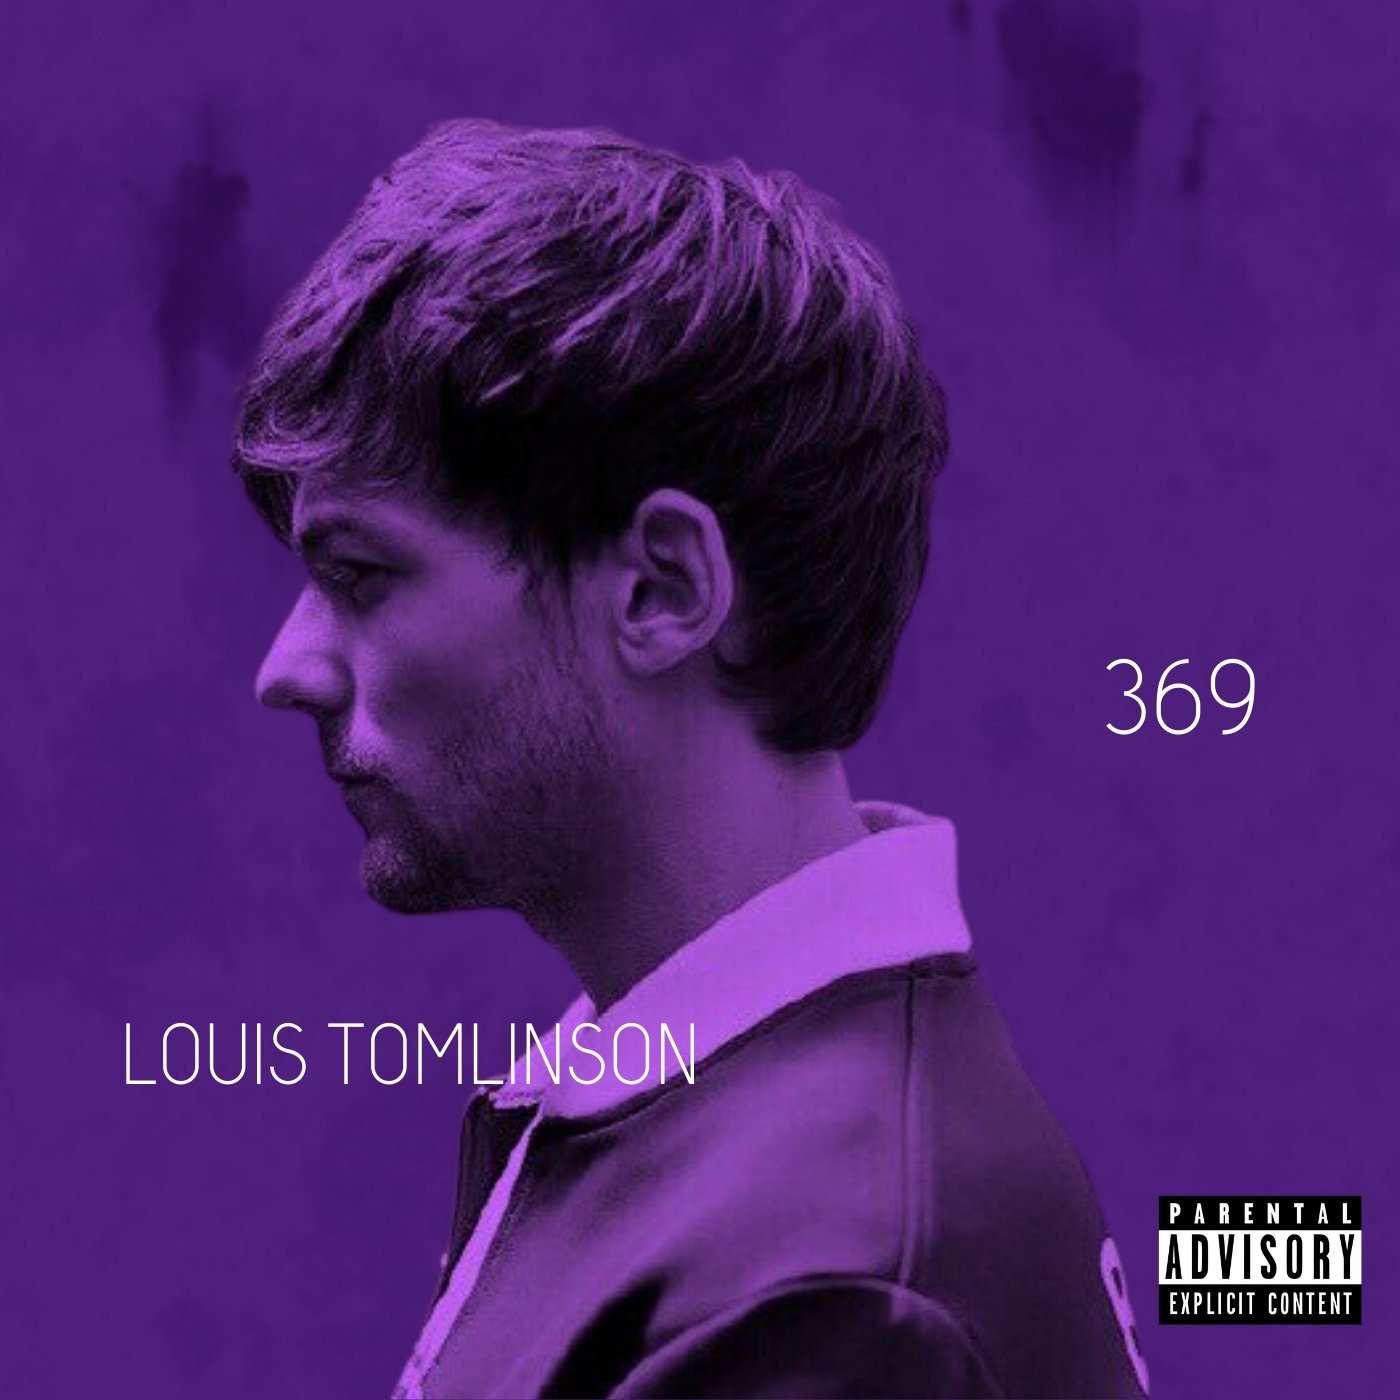 Release “Walls” by Louis Tomlinson - Cover Art - MusicBrainz